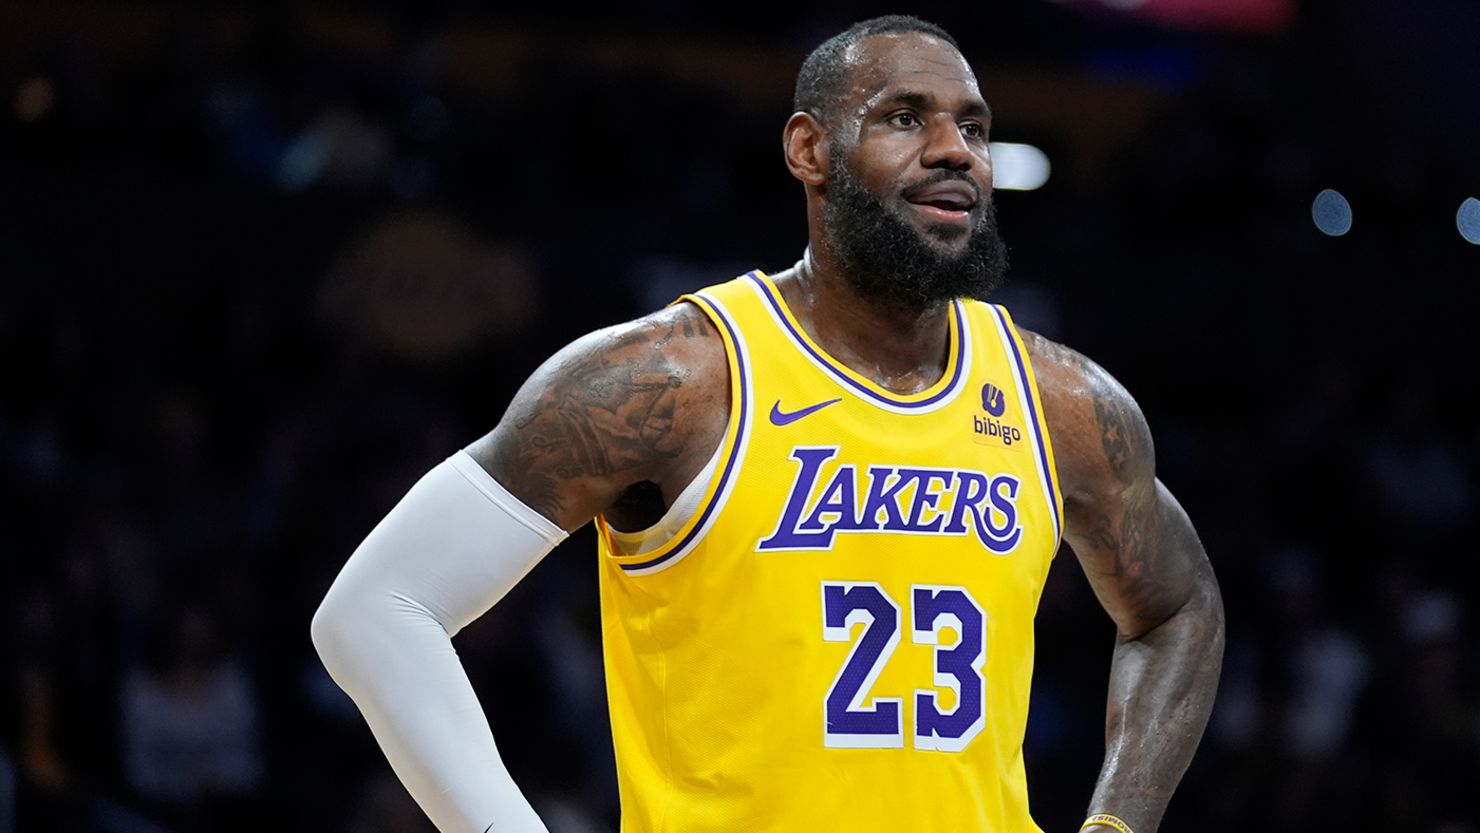 LeBron James named to record 20th NBA All-Star Game